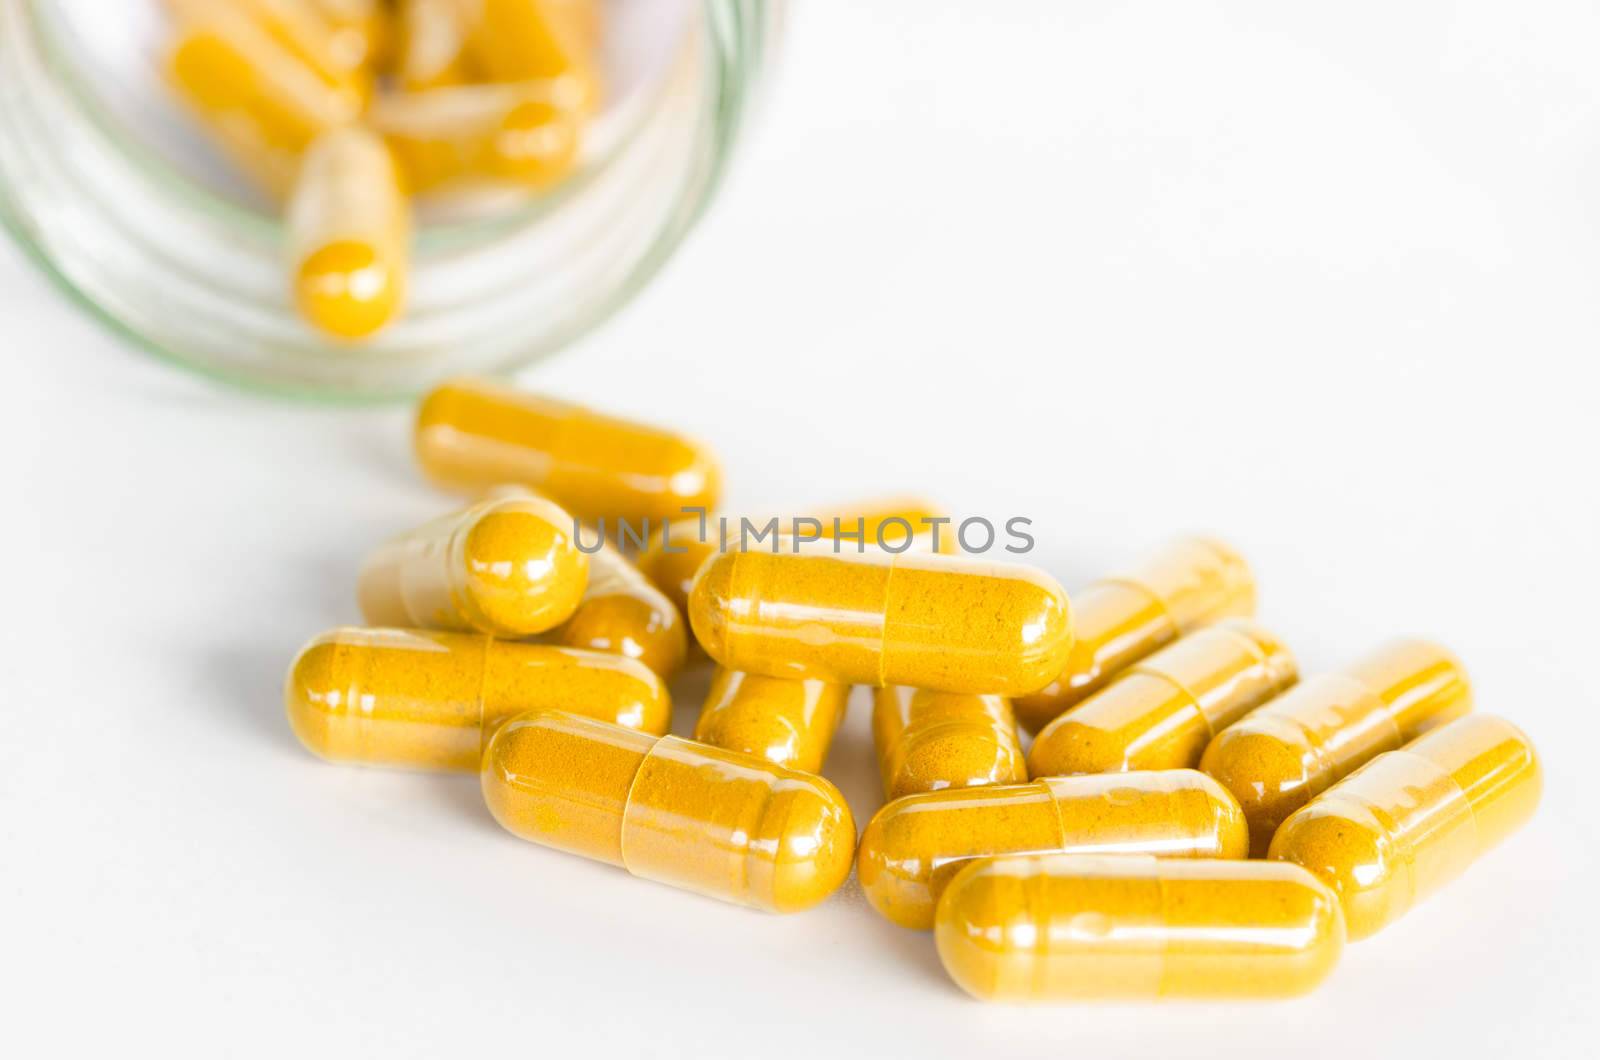 Turmeric capsules spilling out of a bottle